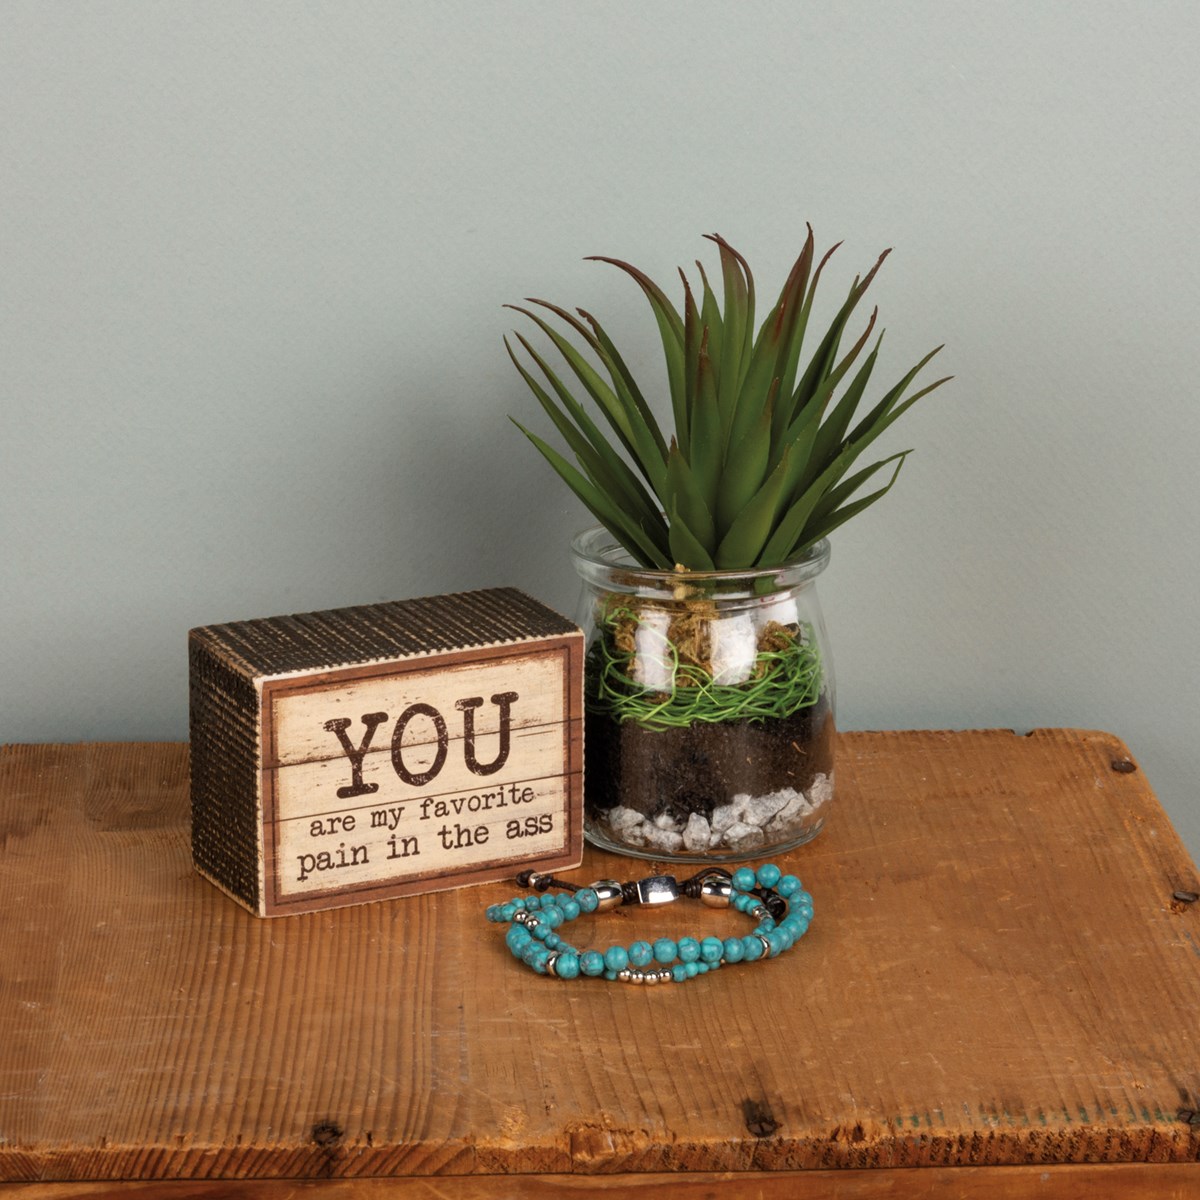 Box Sign - You Are My Favorite Pain - 3.50" x 2.50" x 1.75" - Wood, Paper